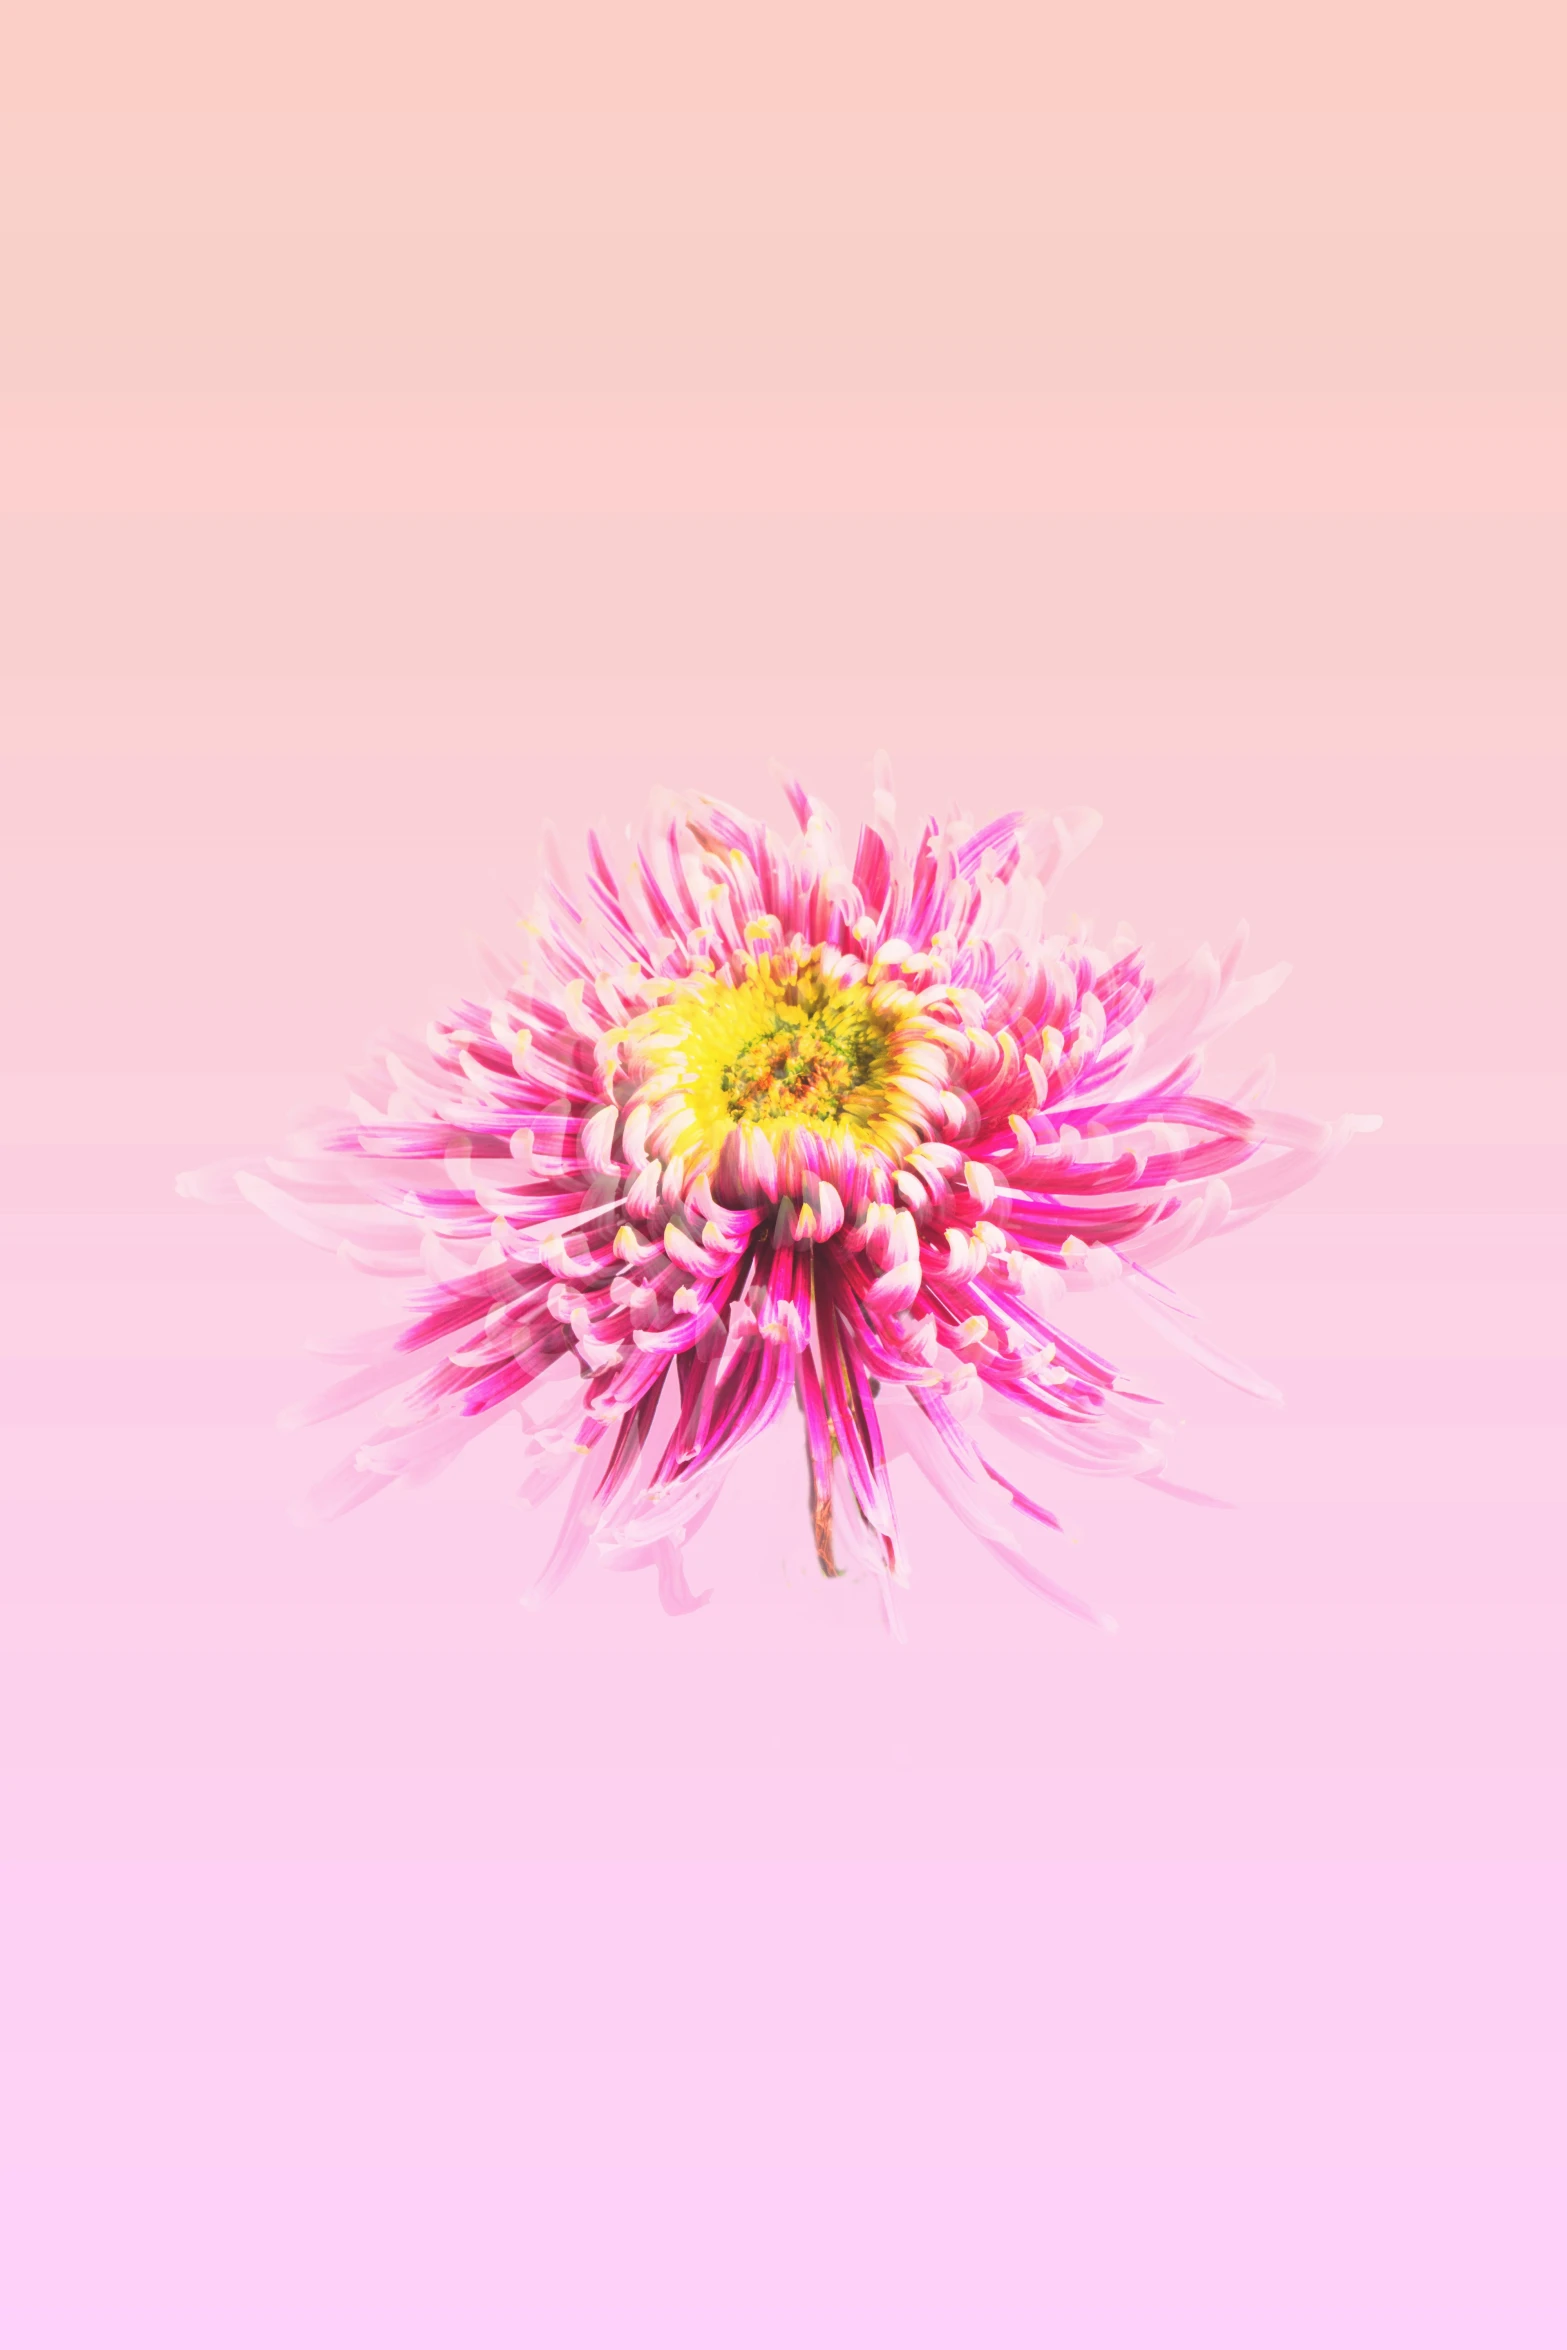 a colorful flower on a pink background with no image editing